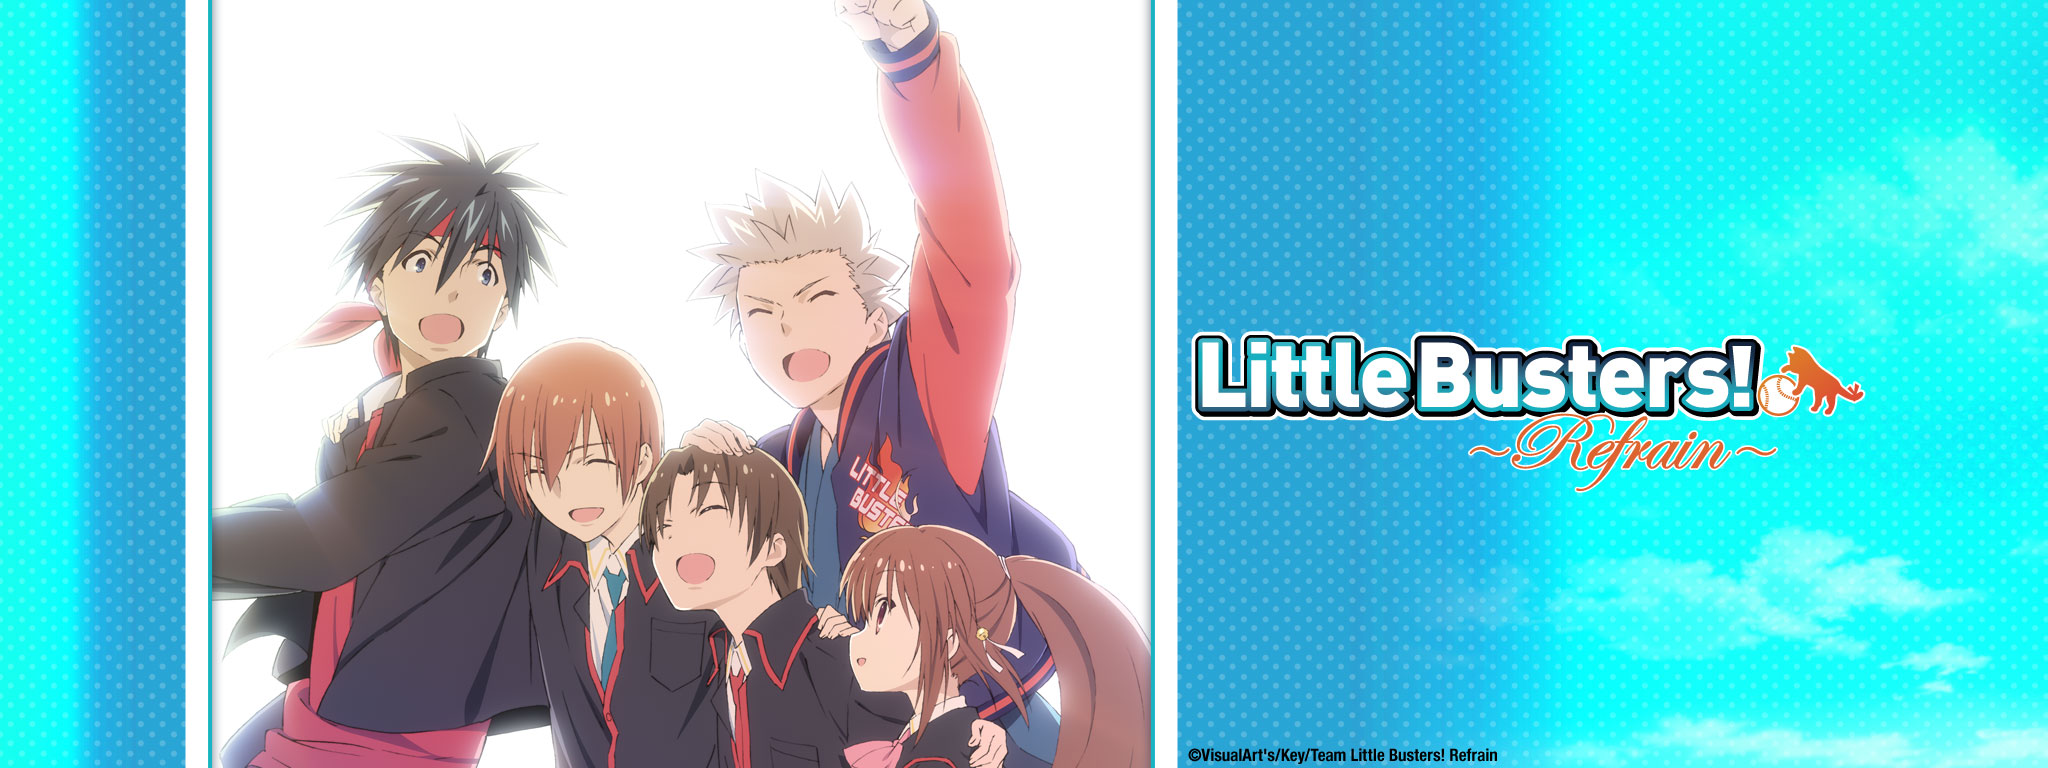 Title Art for Little Busters! Refrain